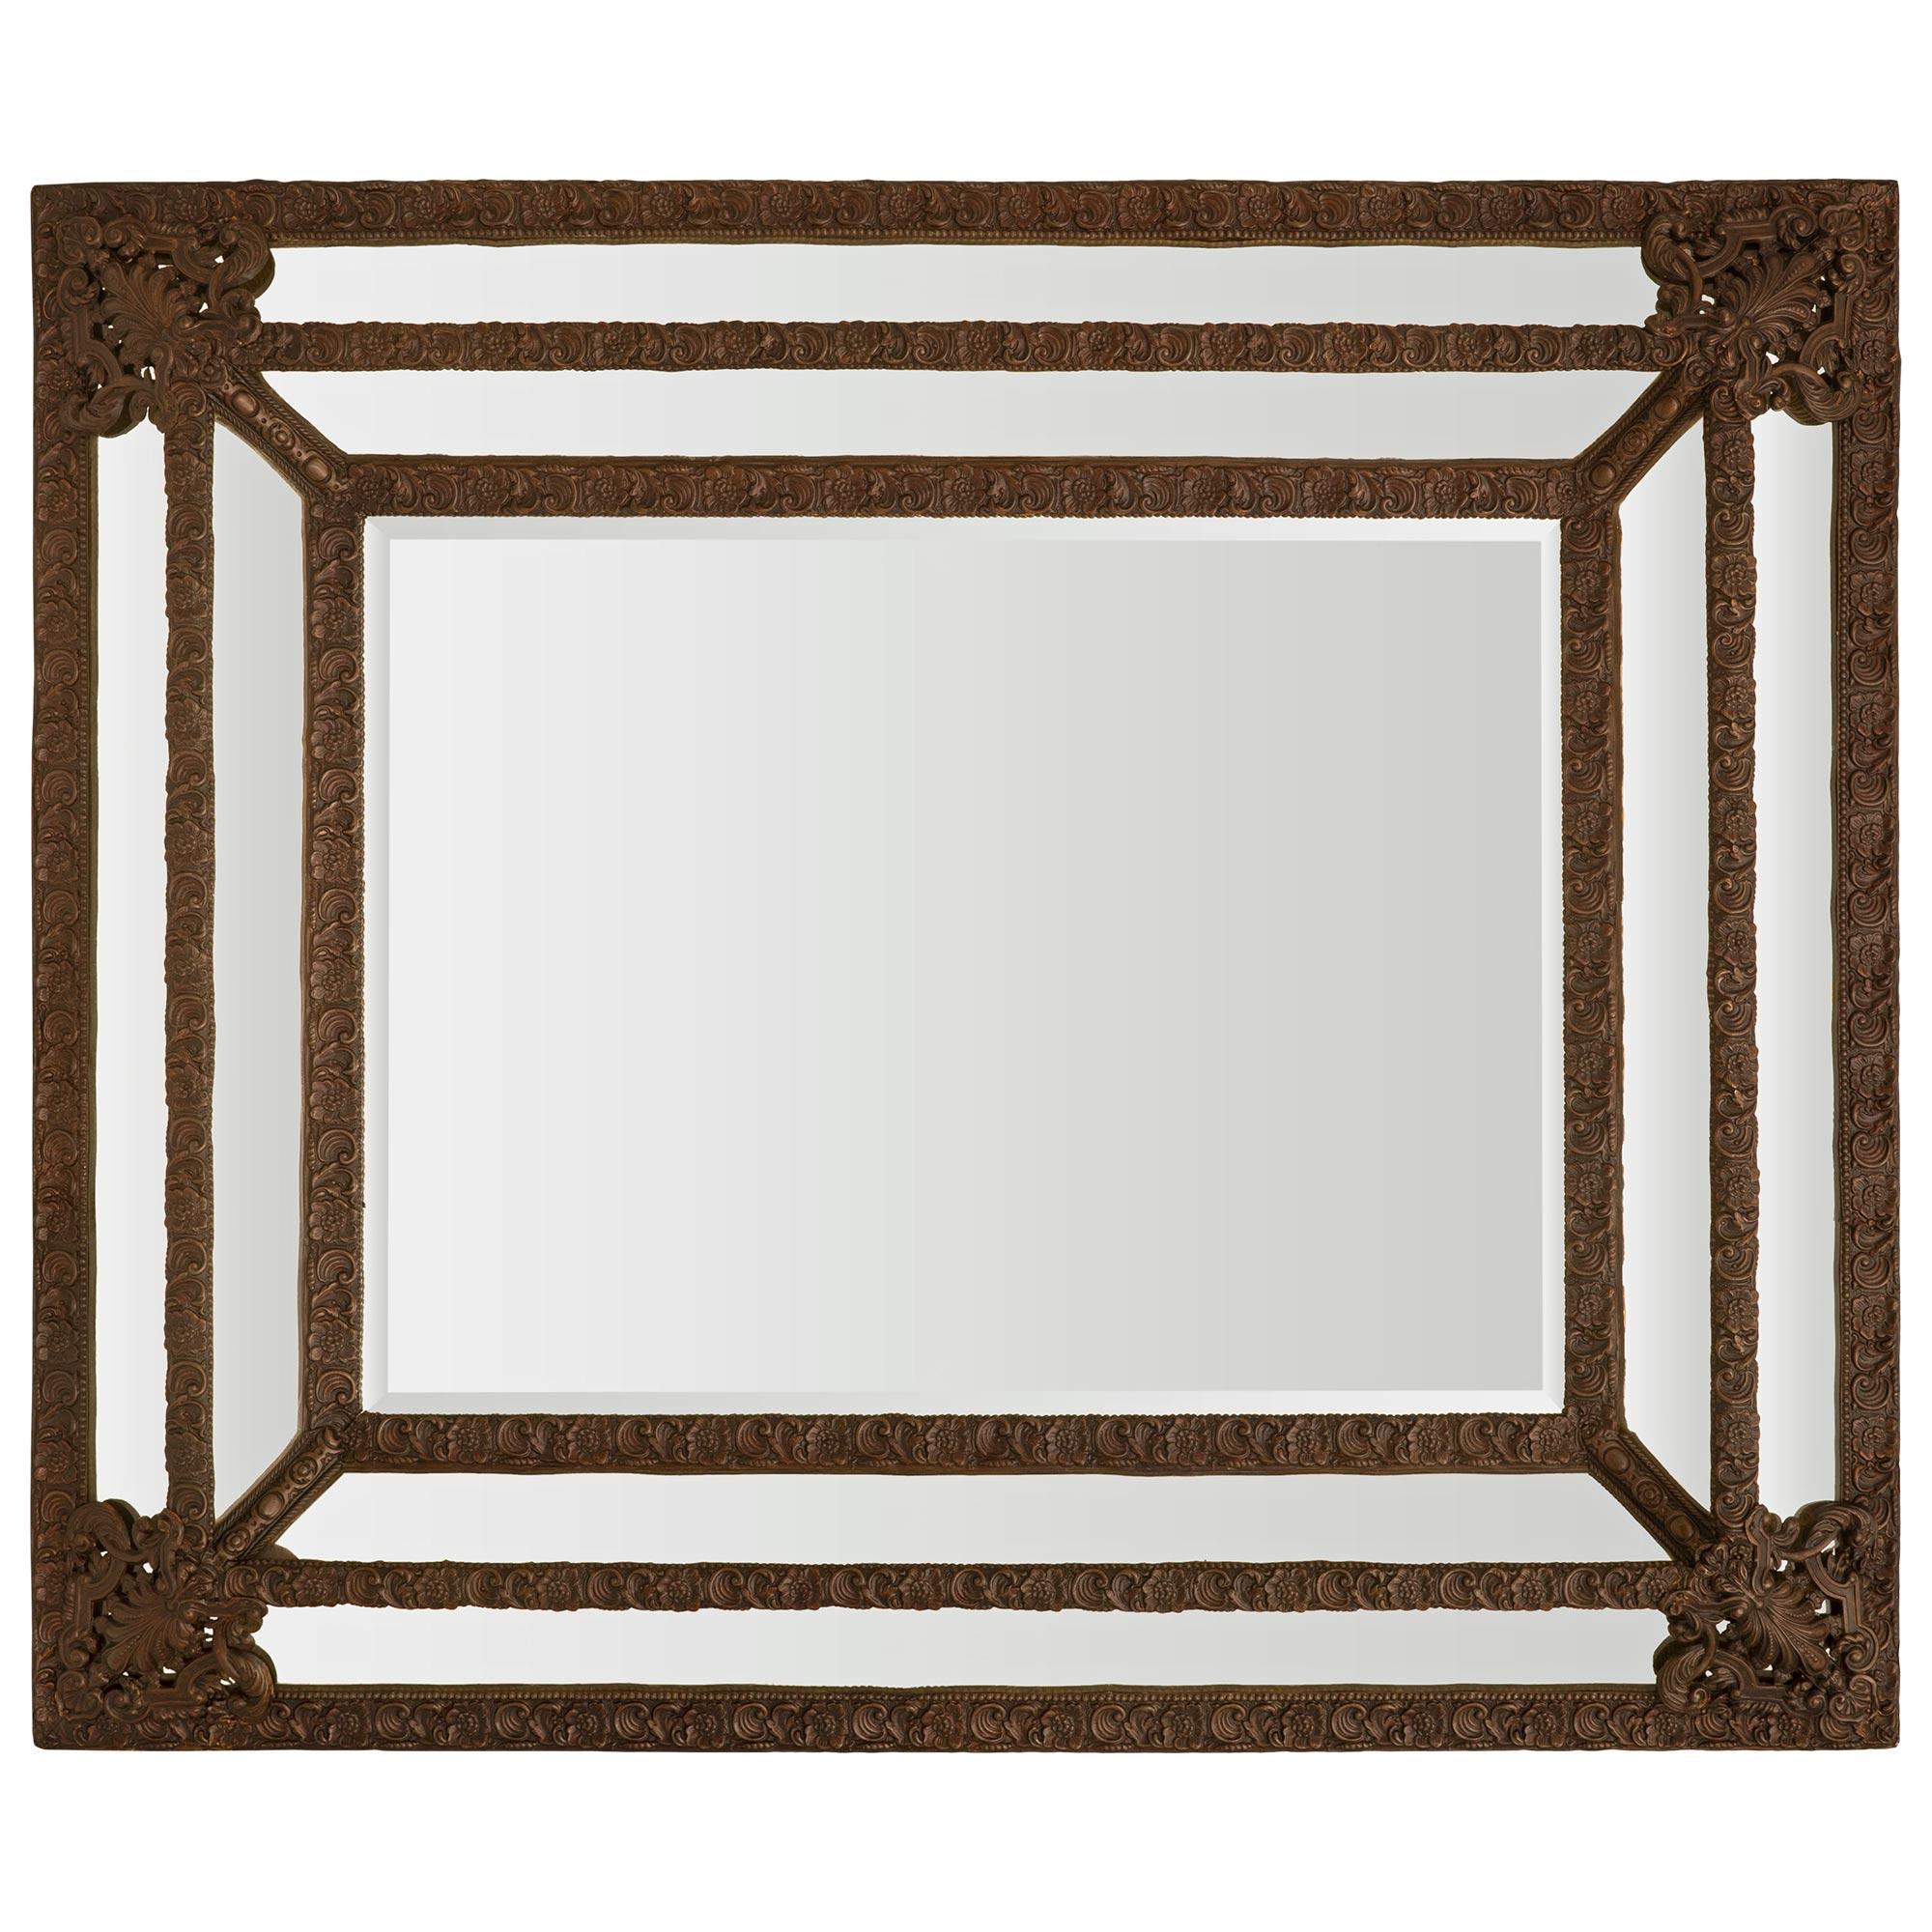 A most handsome Dutch 19th century Baroque st. patinated Pressed Metal double framed mirror. The mirror retains all original mirror plates, with the central beveled mirror framed within a finely mottled and beaded band with foliate and seashell